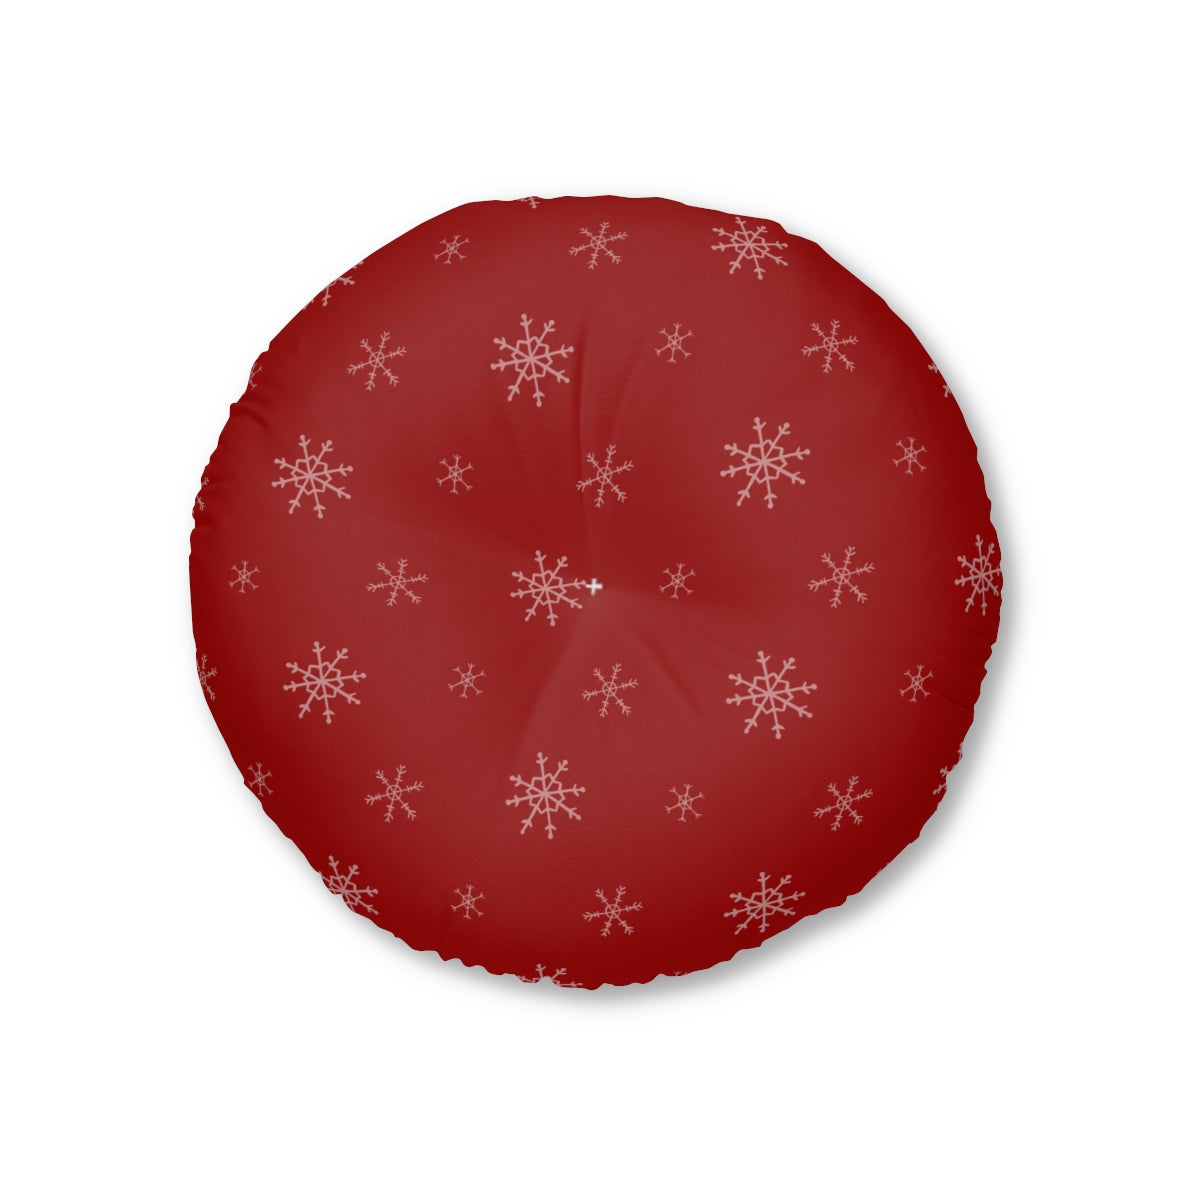 Lifestyle Details - Red Round Tufted Holiday Floor Pillow - Snowflakes - 26x26 - Front View